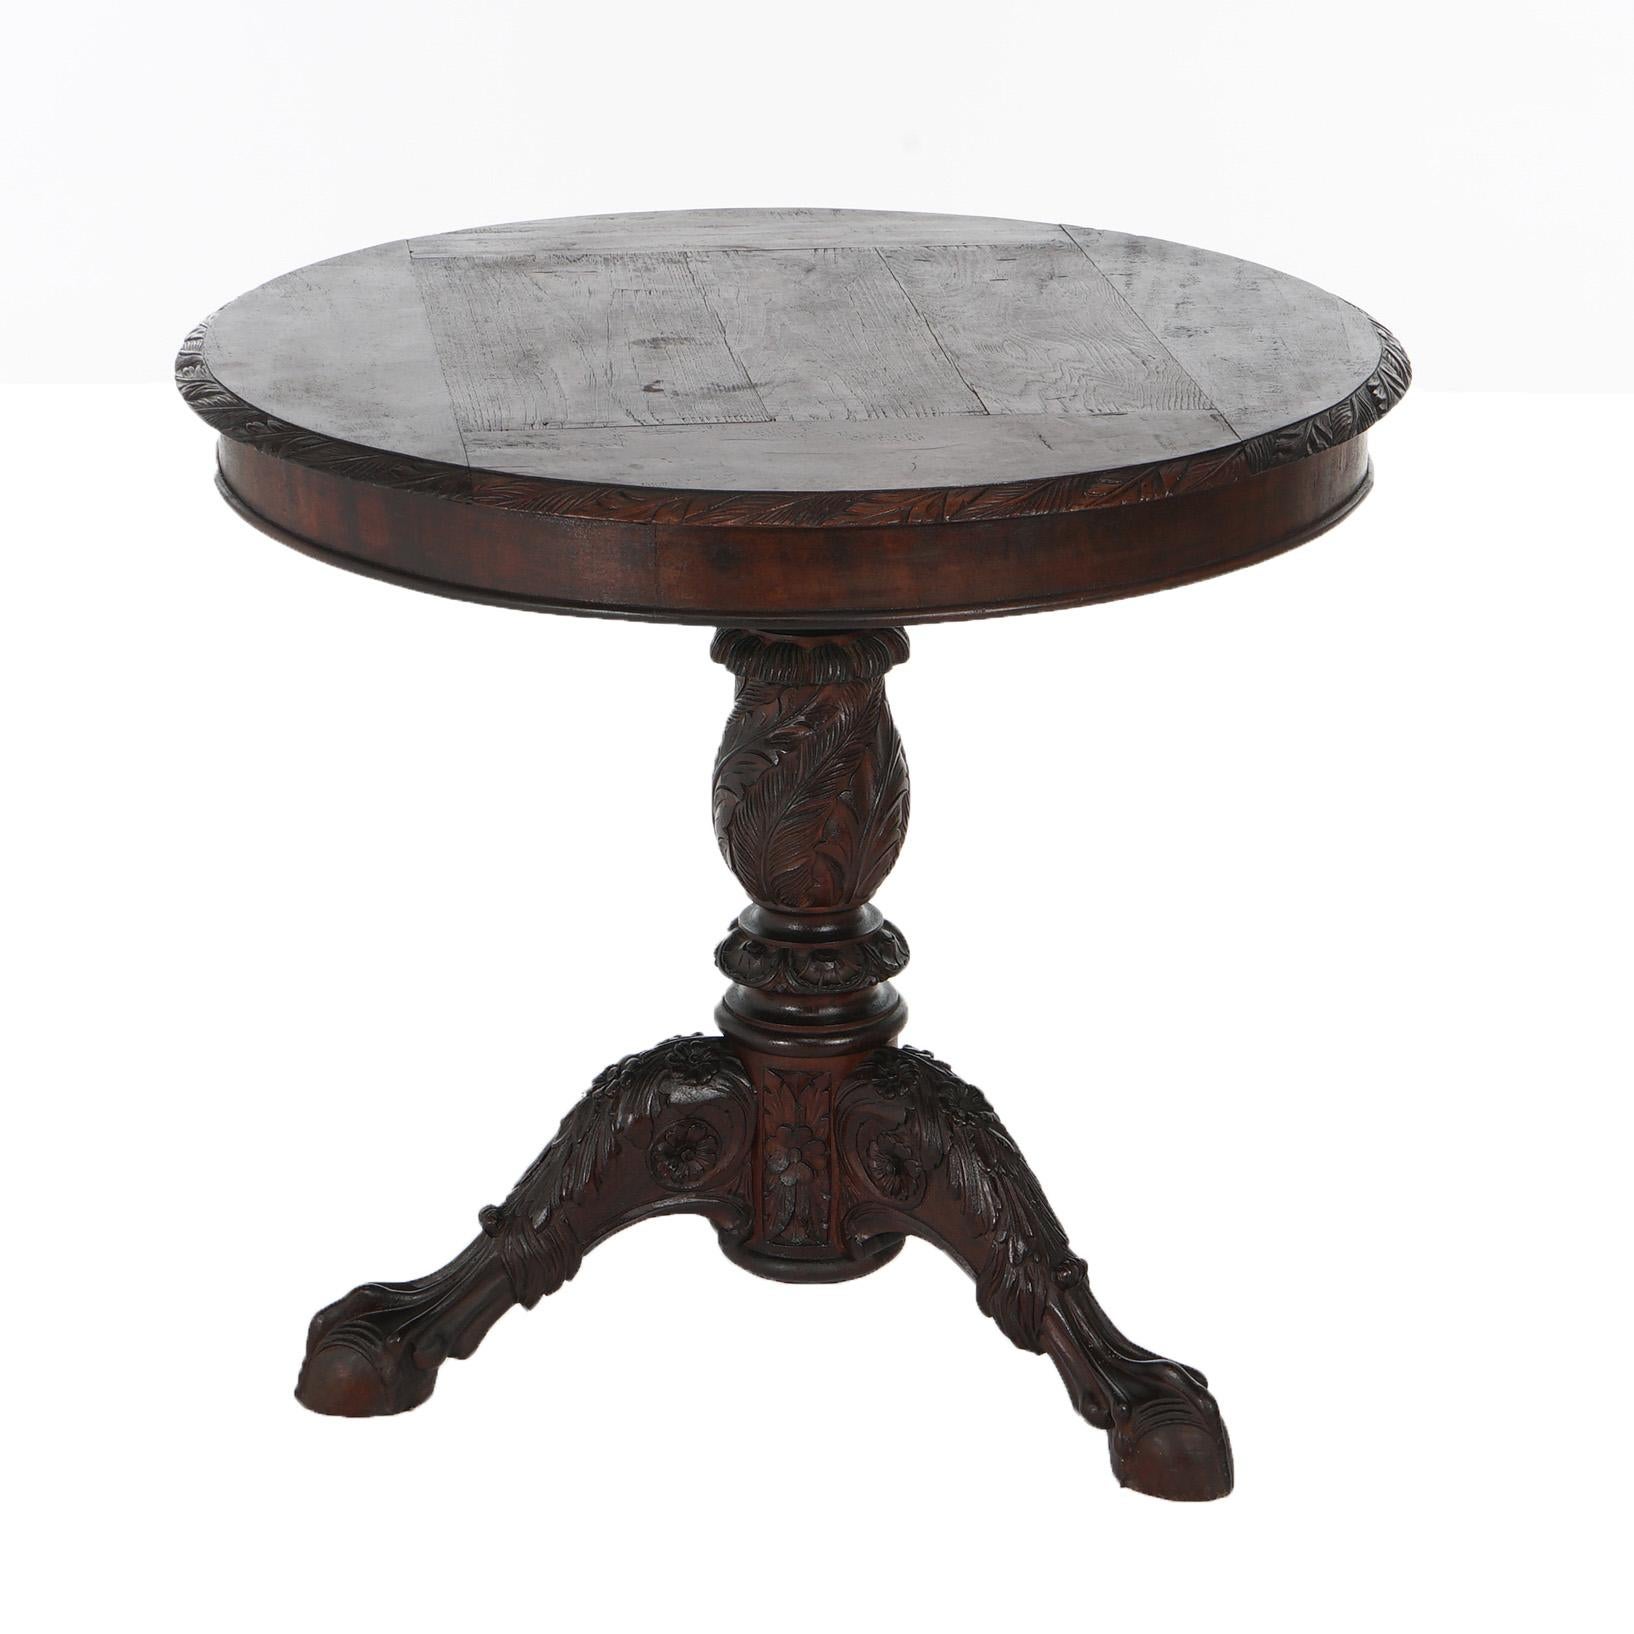 ***Ask About Reduced In-House Delivery Rates - Reliable Professional Service & Fully Insured***
Antique Neoclassical American Empire Carved Mahogany Center Table with Foliate, Acanthus, Claw & Ball Elements, C1840

Measures- 29.5''H x 32''W x 32''D